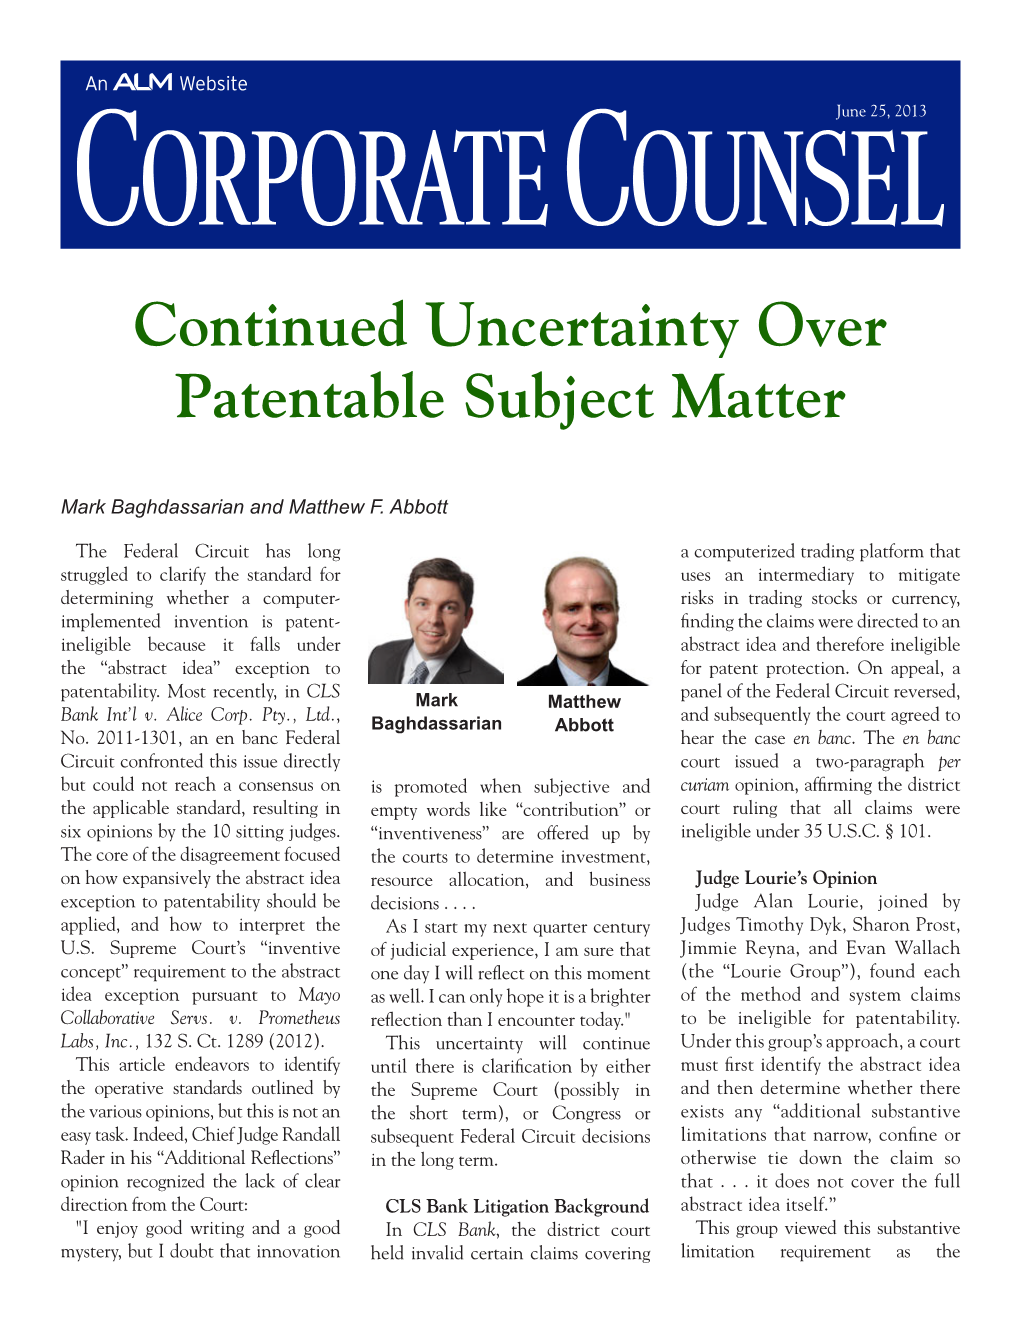 Corporate Counsel: Continued Uncertainty Over Patentable